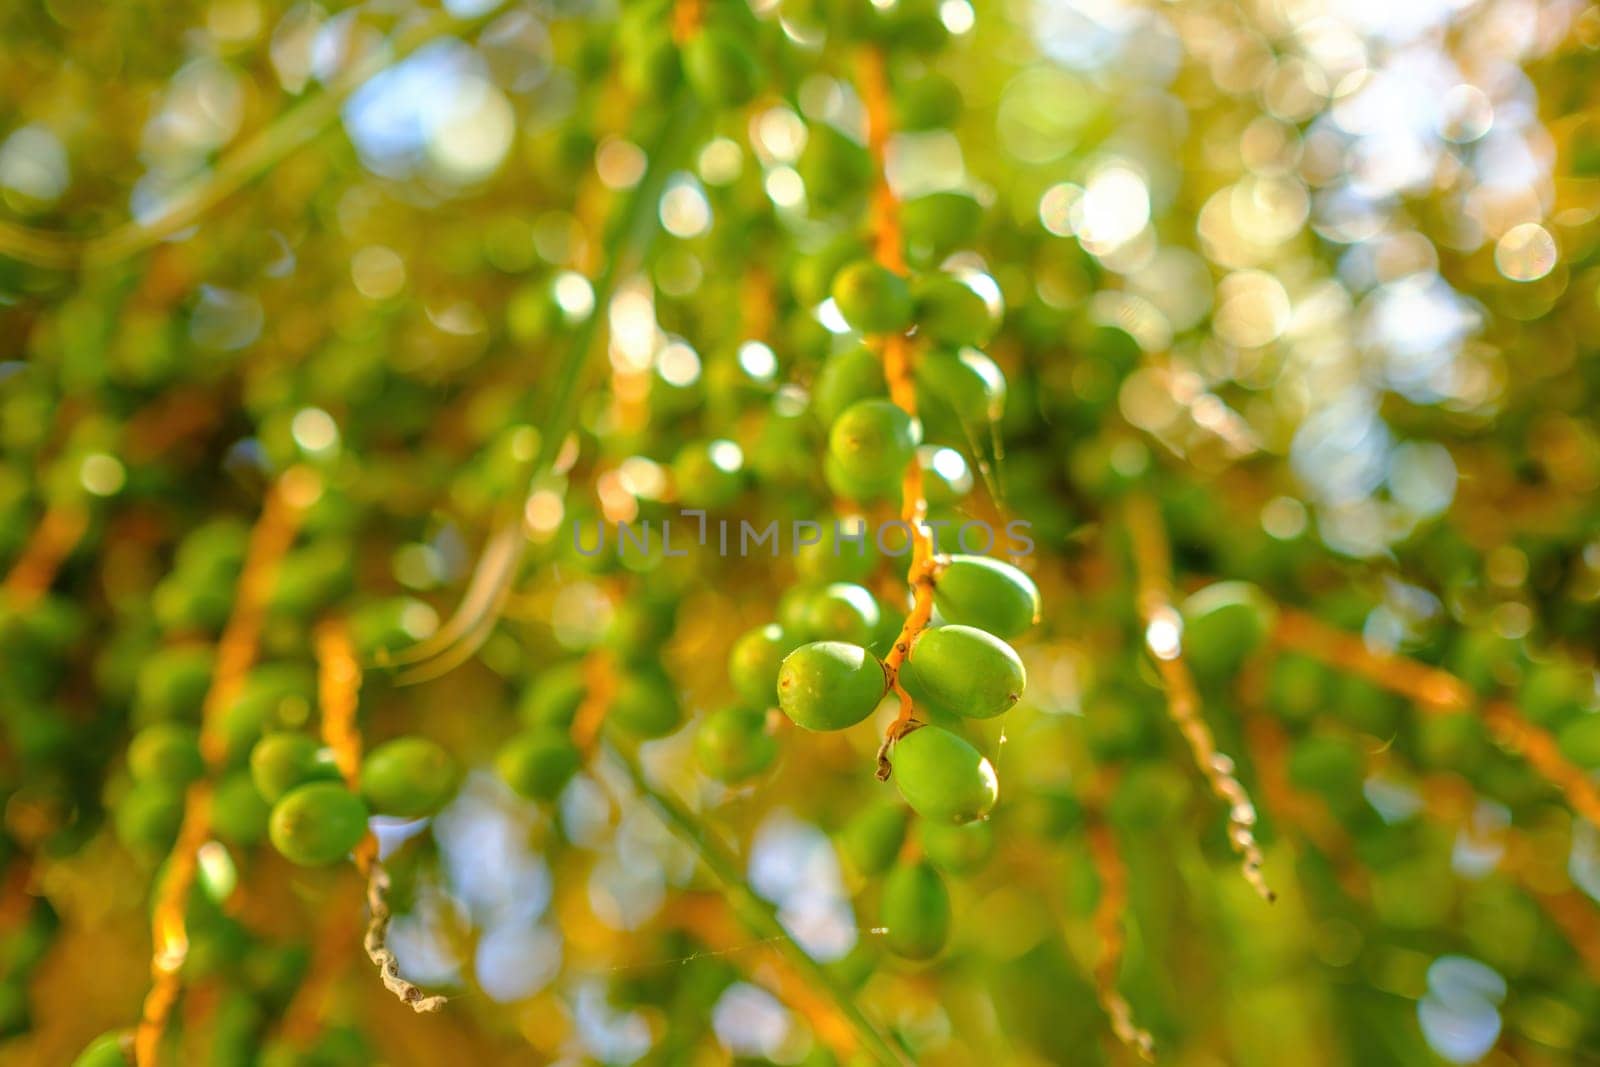 Date palm tree with branches of unripe green fruits. Exotic date palm tree with unripe green fruits at bright sunlight. Sun ray break through branches closeup